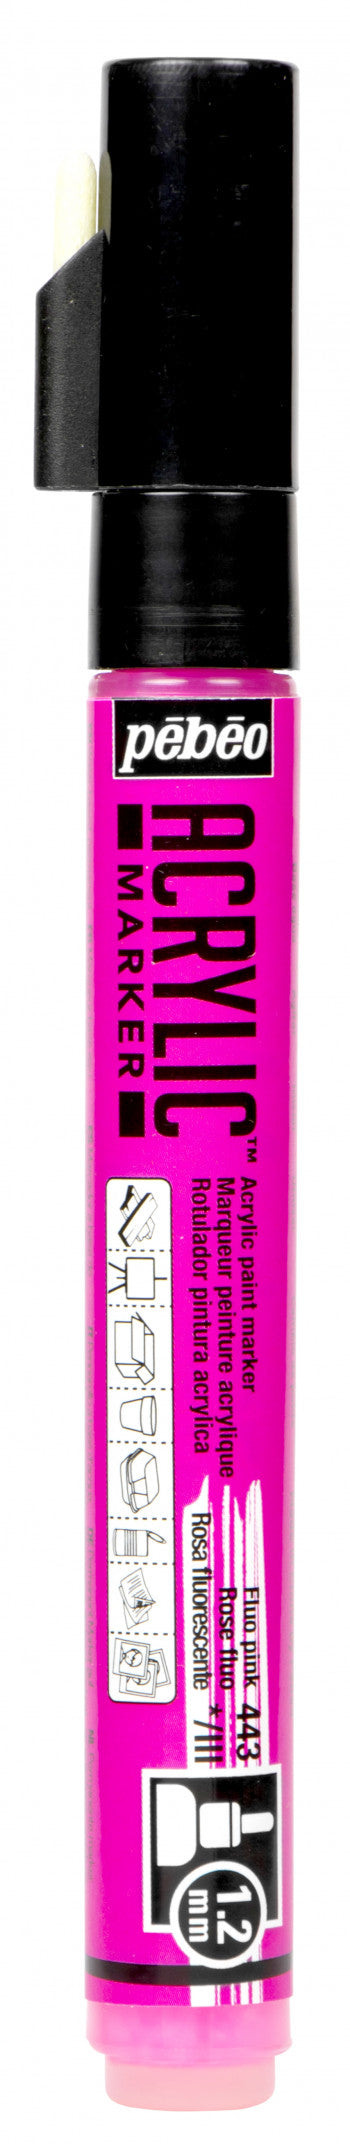 Acrylic Marker 1.2mm Pebeo      Rose fluo - 443